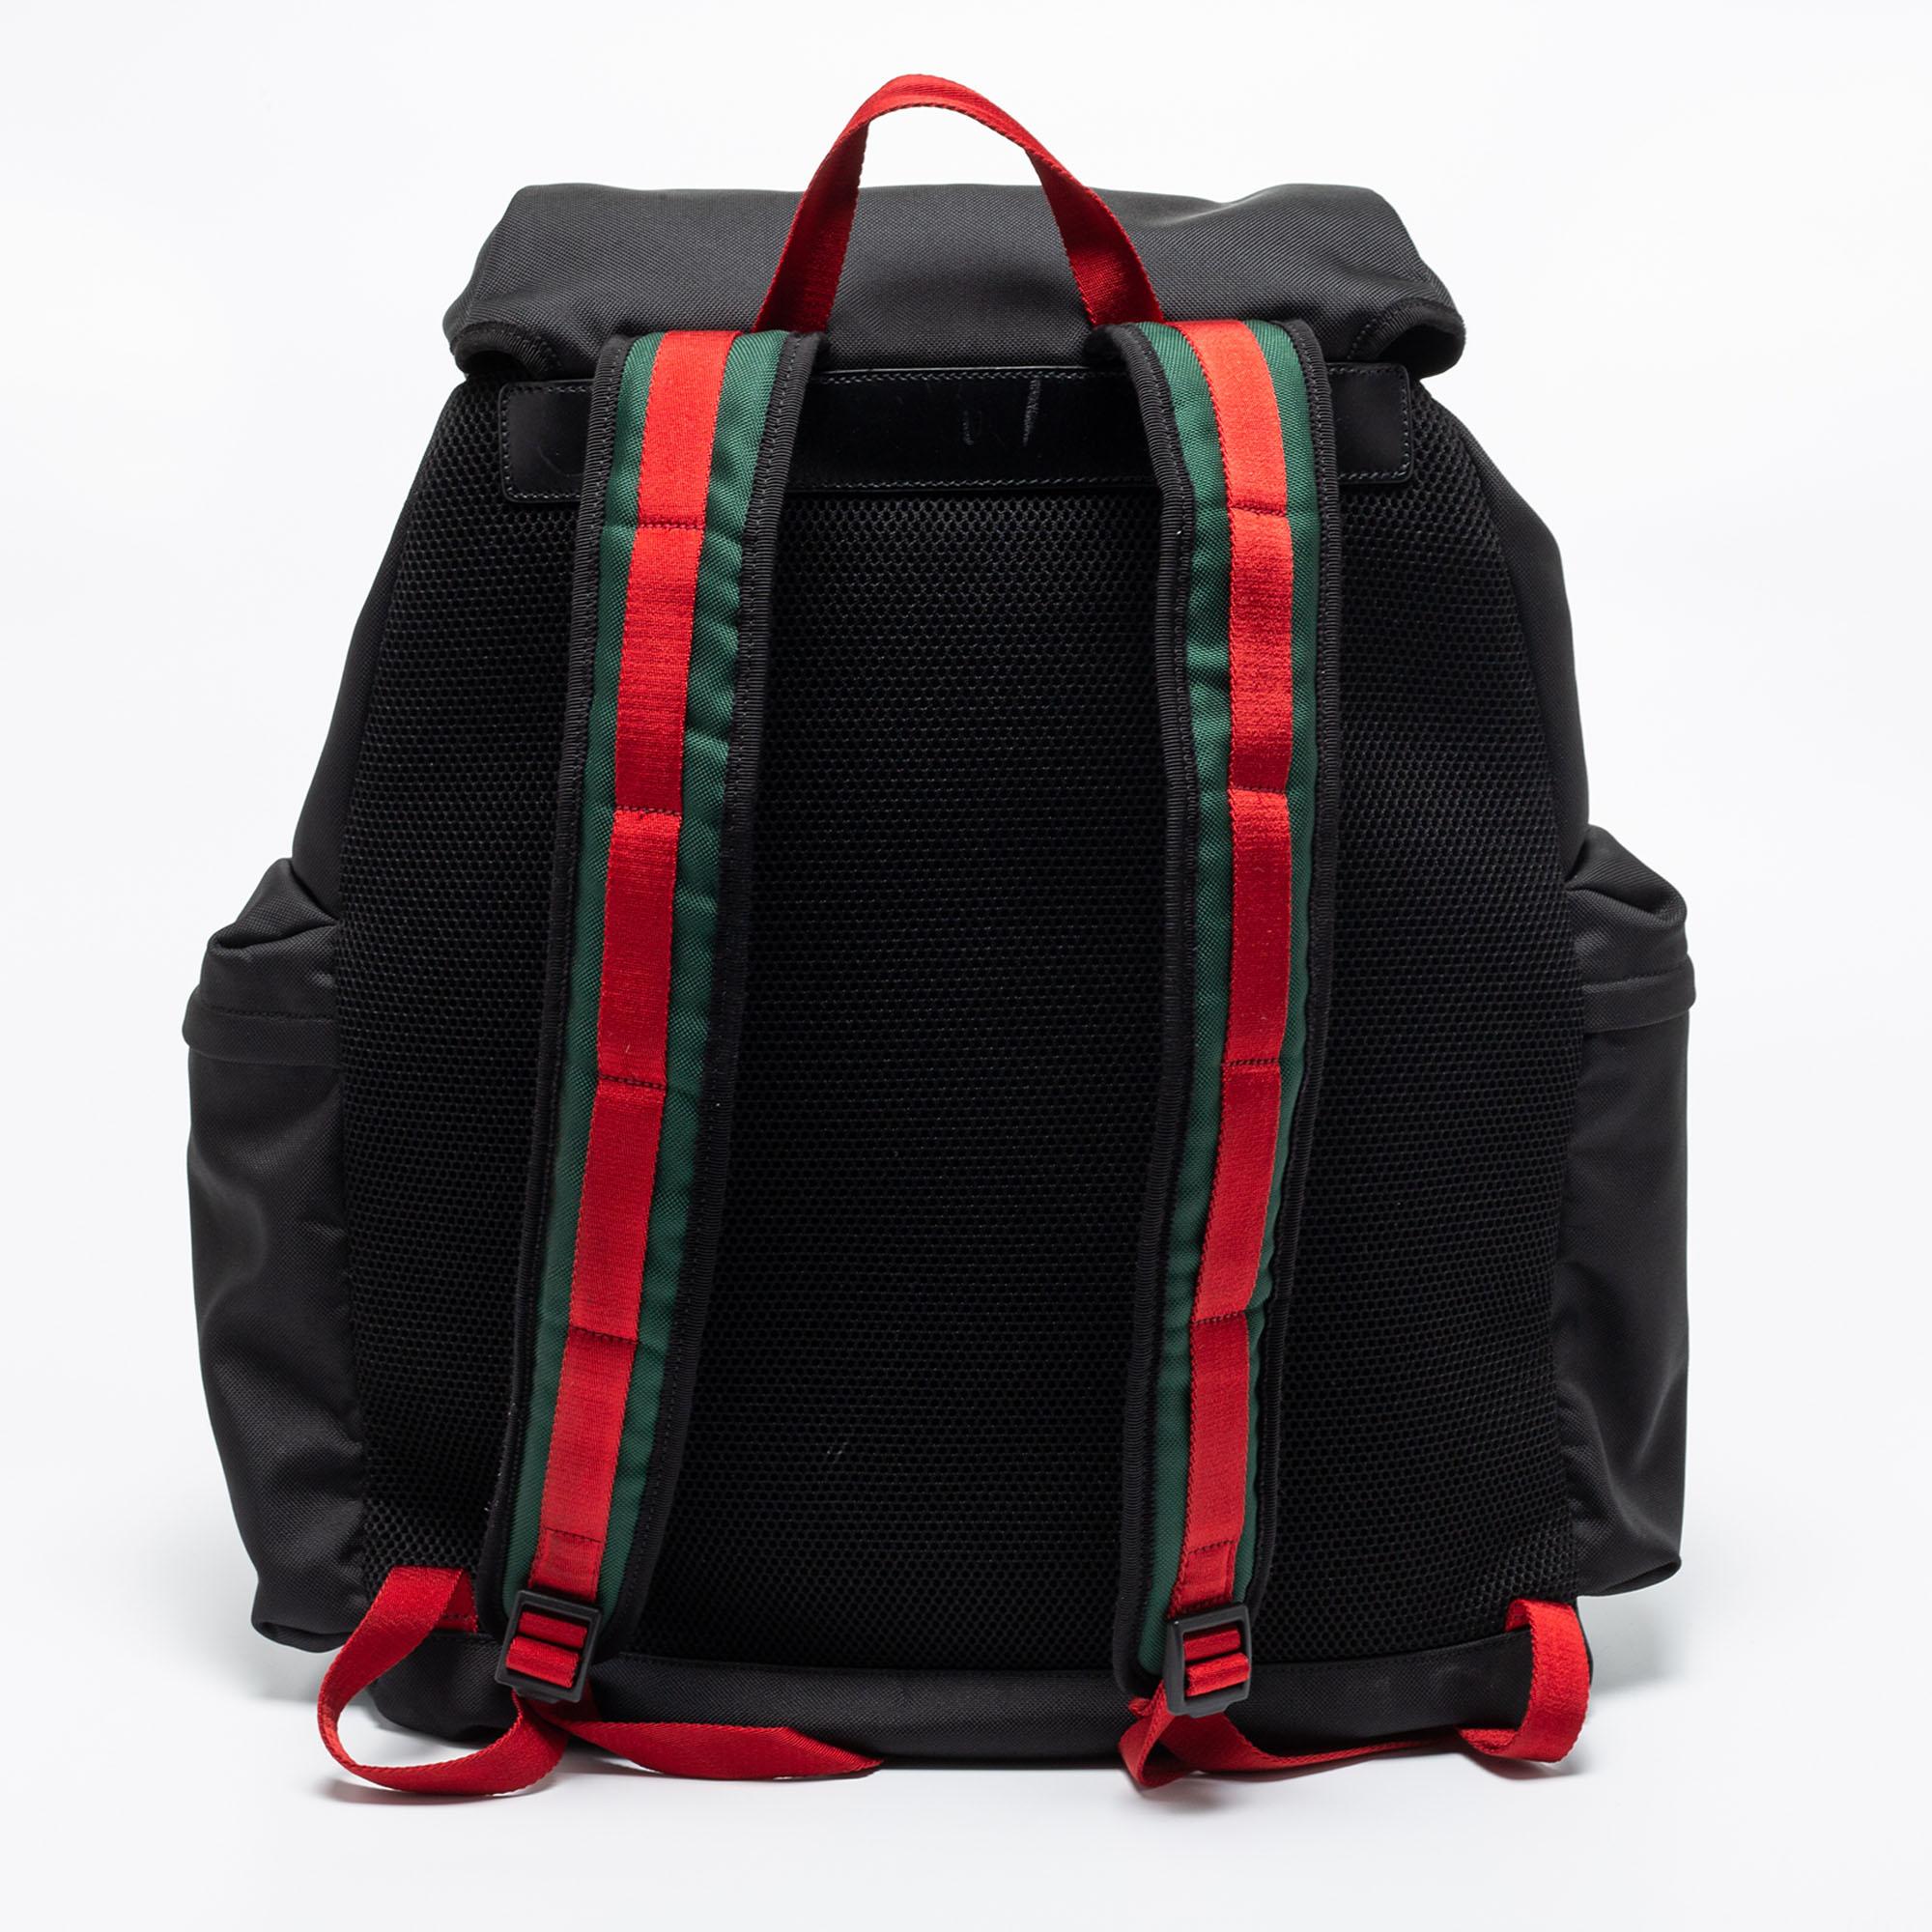 This light backpack by Gucci is carefully crafted from black nylon. The drawstring closure reveals a spacious interior that accommodates essentials quite comfortably. Just the right backpack for short trips!

